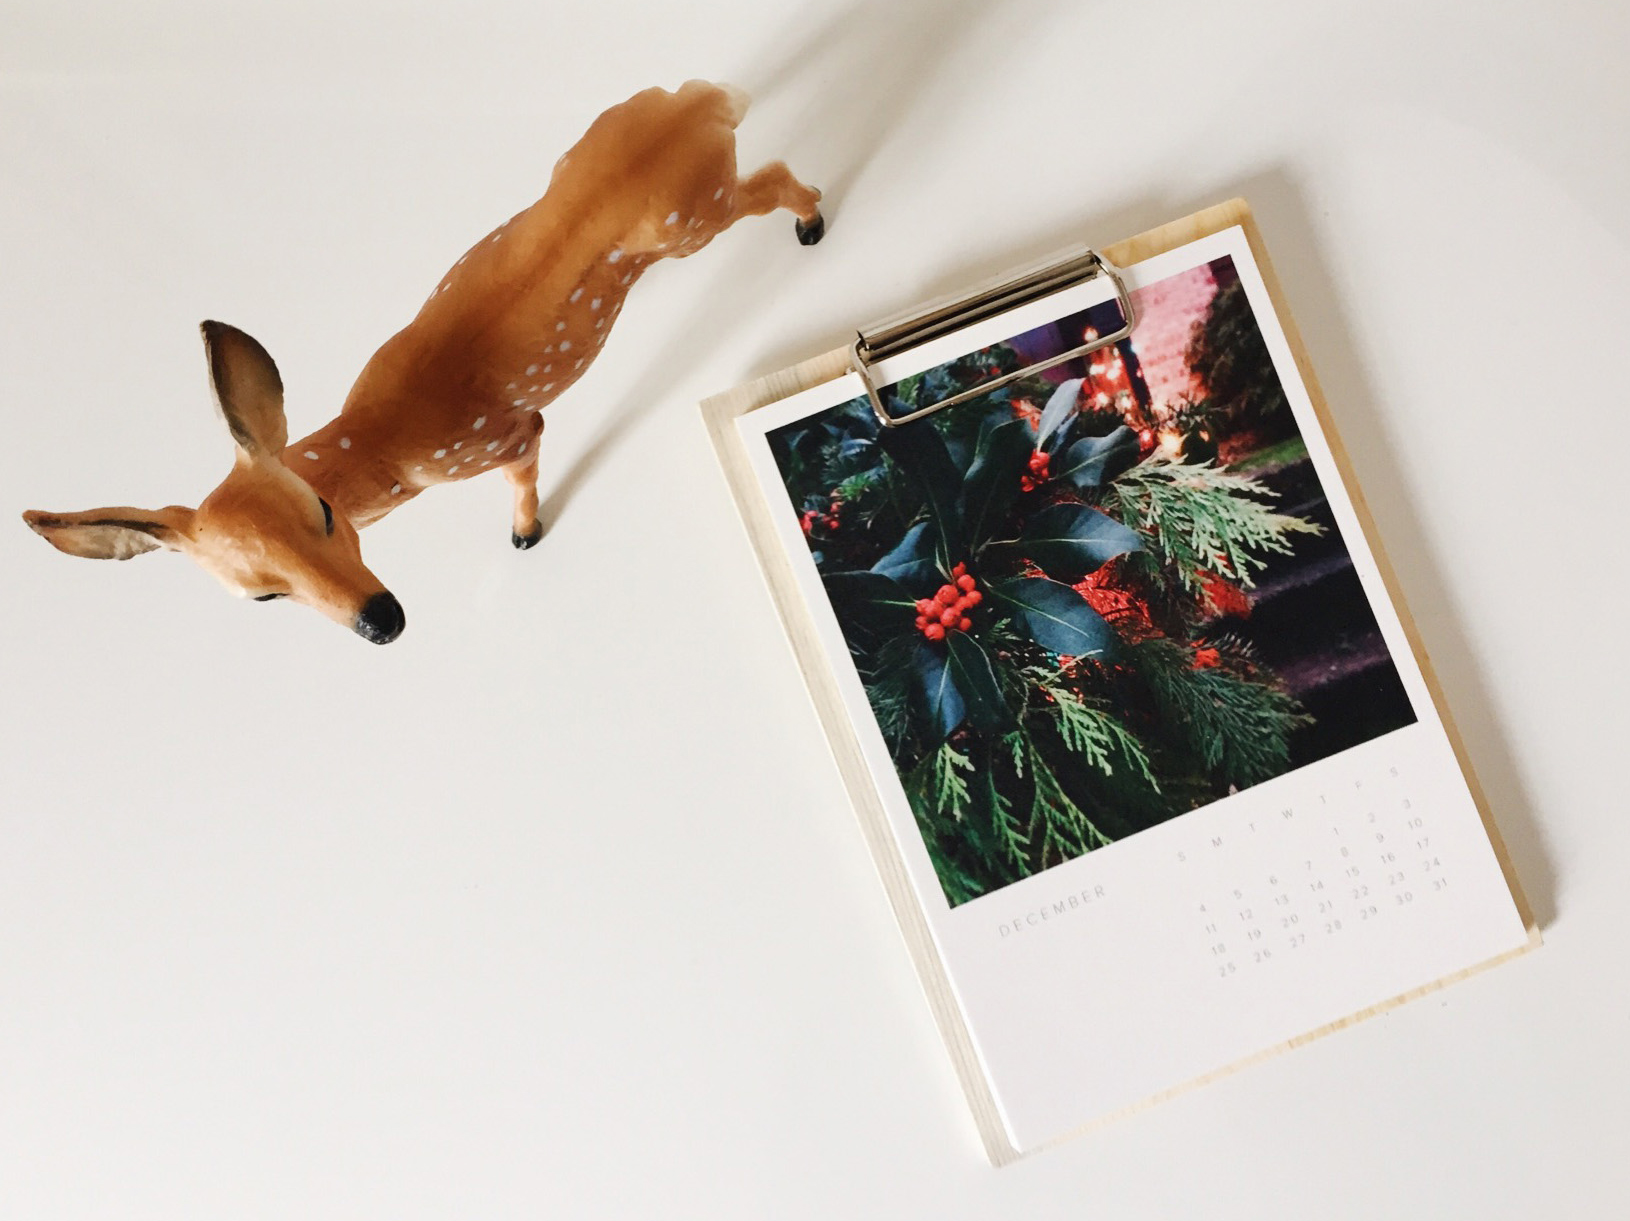 May 2016 desk calendar by Sweet Eventide Photography